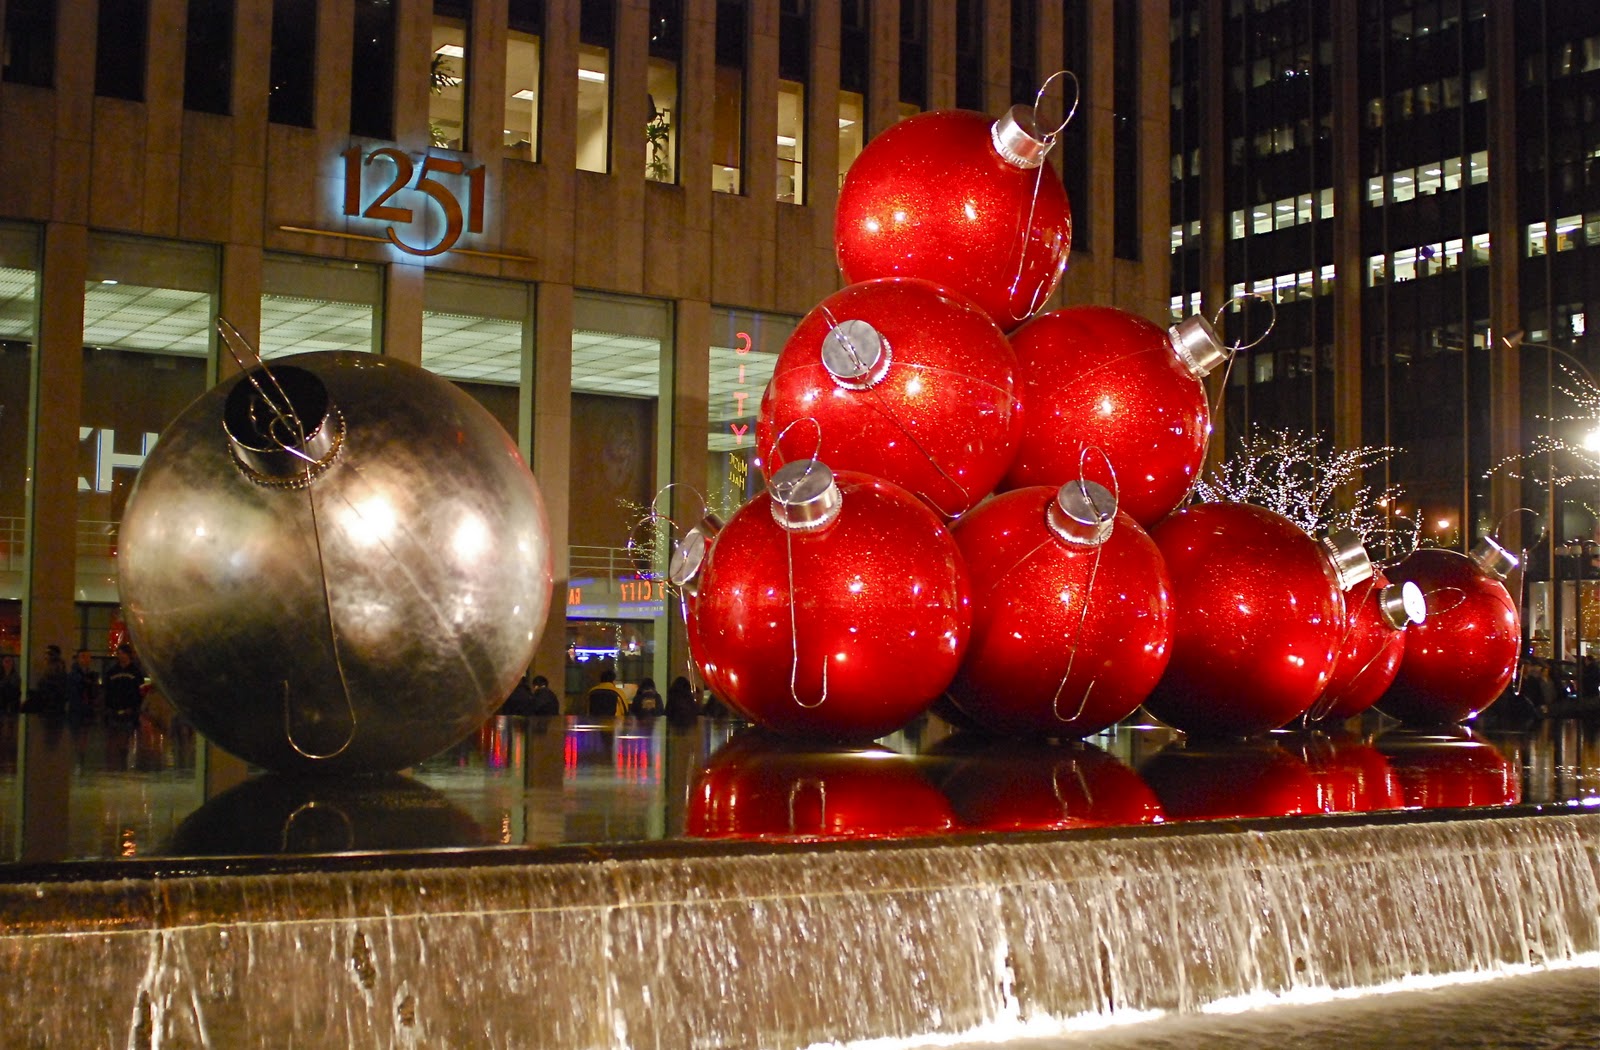 NYC ♥ NYC: Giant Christmas Ornaments at 1251 Sixth Avenue